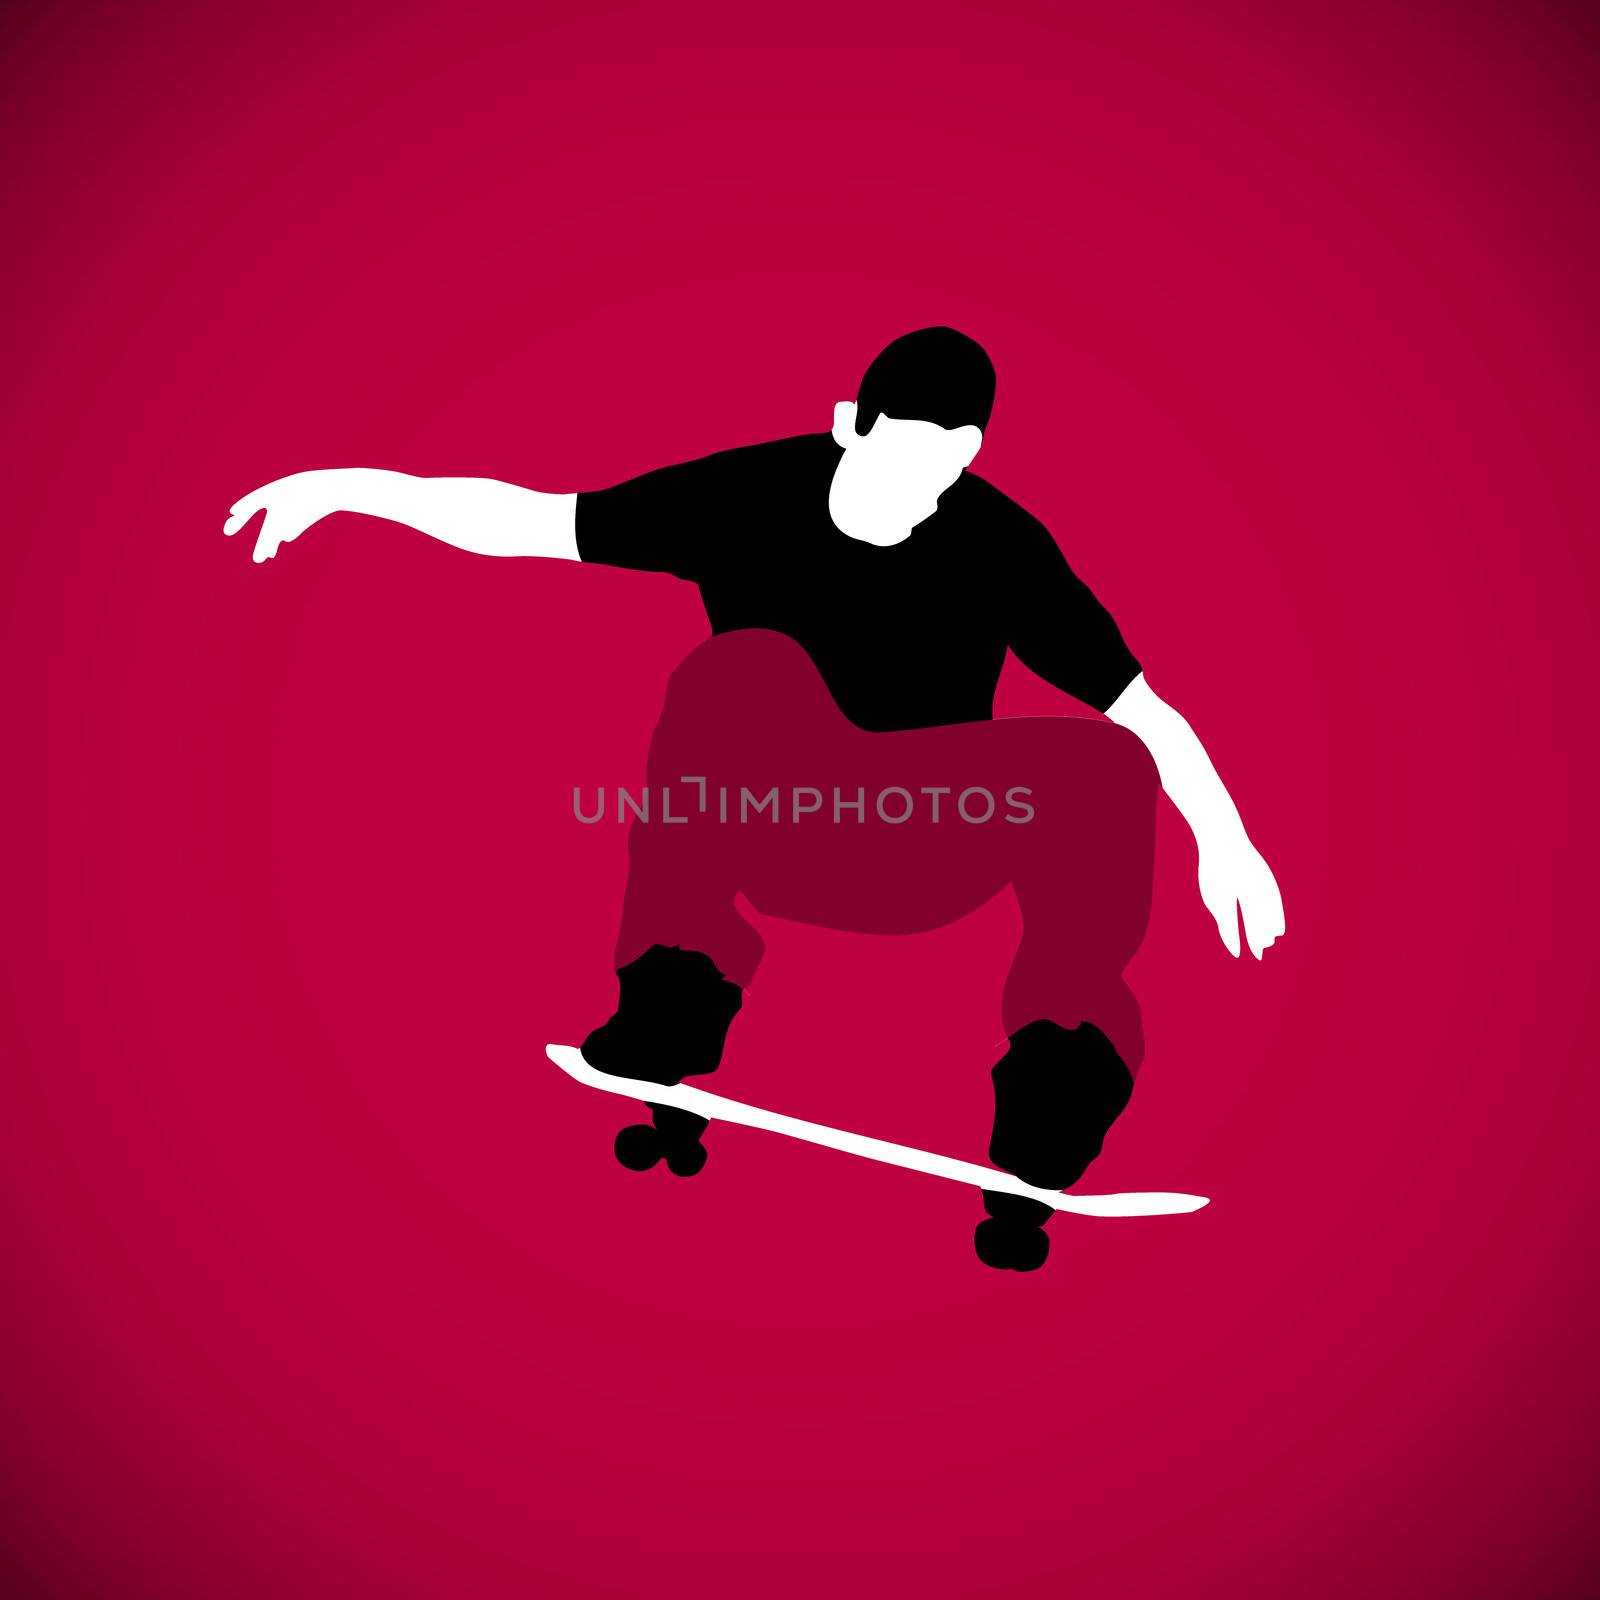 Silhouettes of a skateboarder.